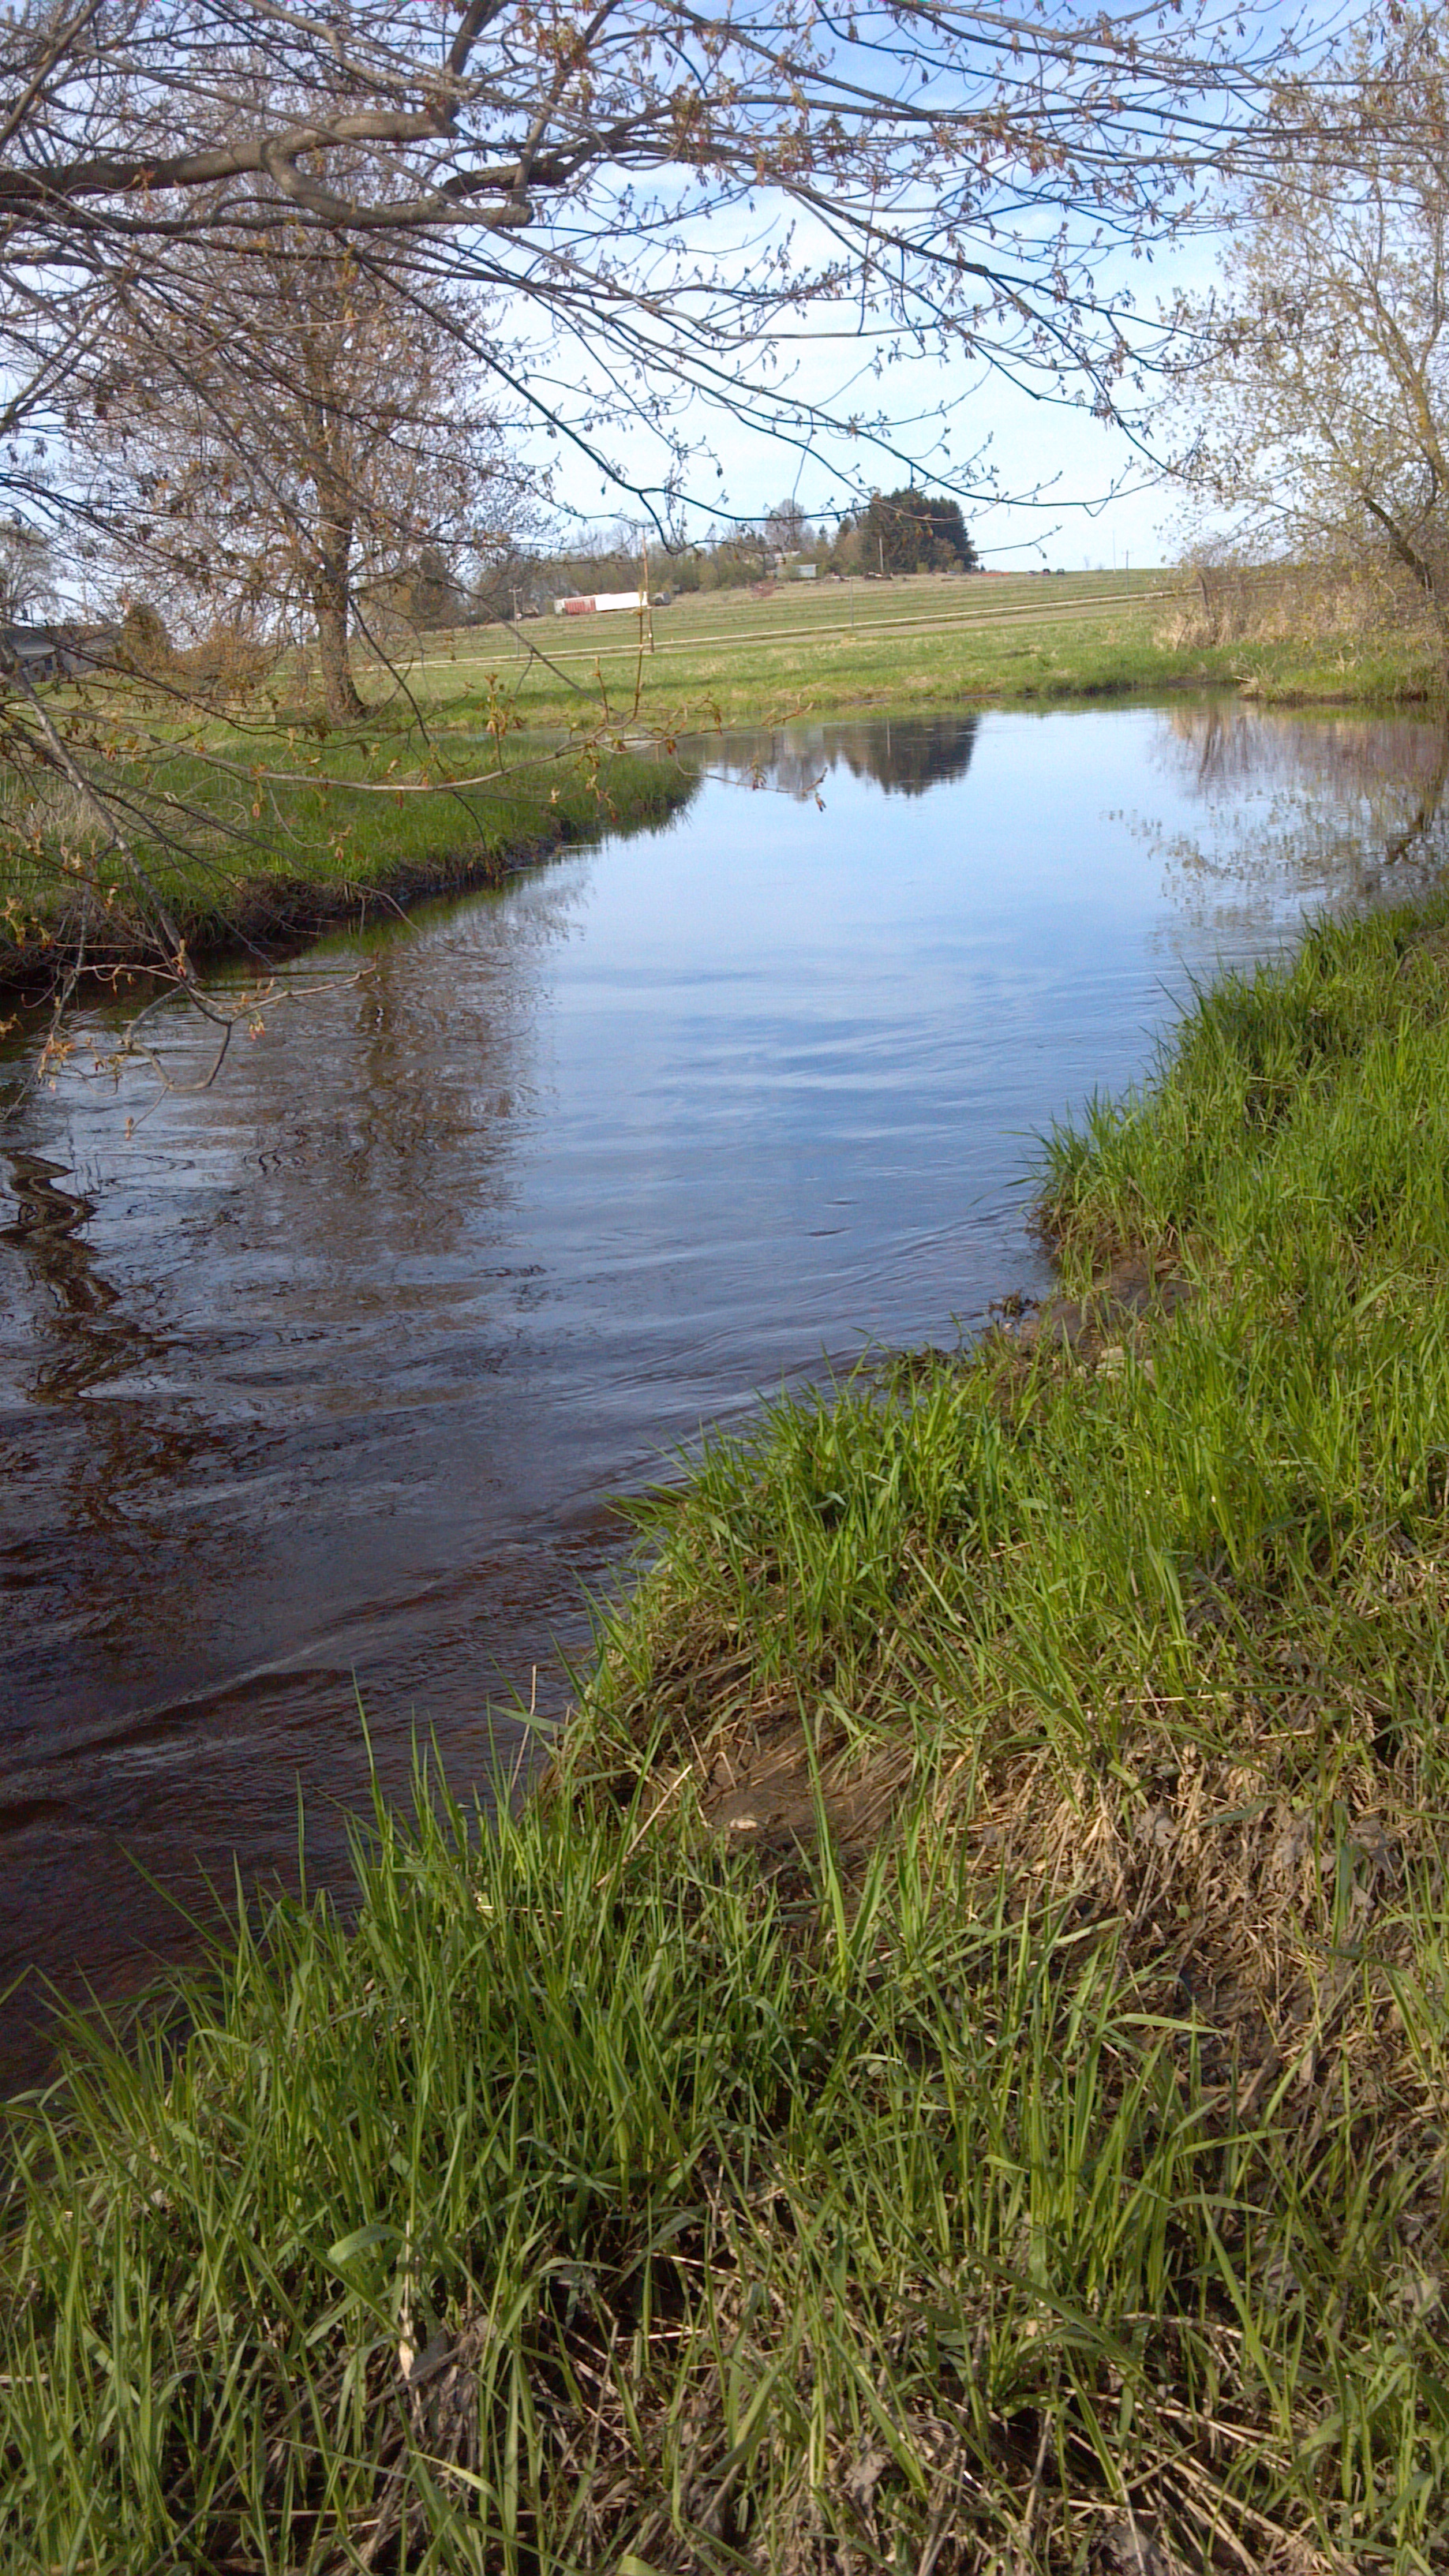 Schisel Lake Outlet, Lower Manitowoc River Watershed (MA02)